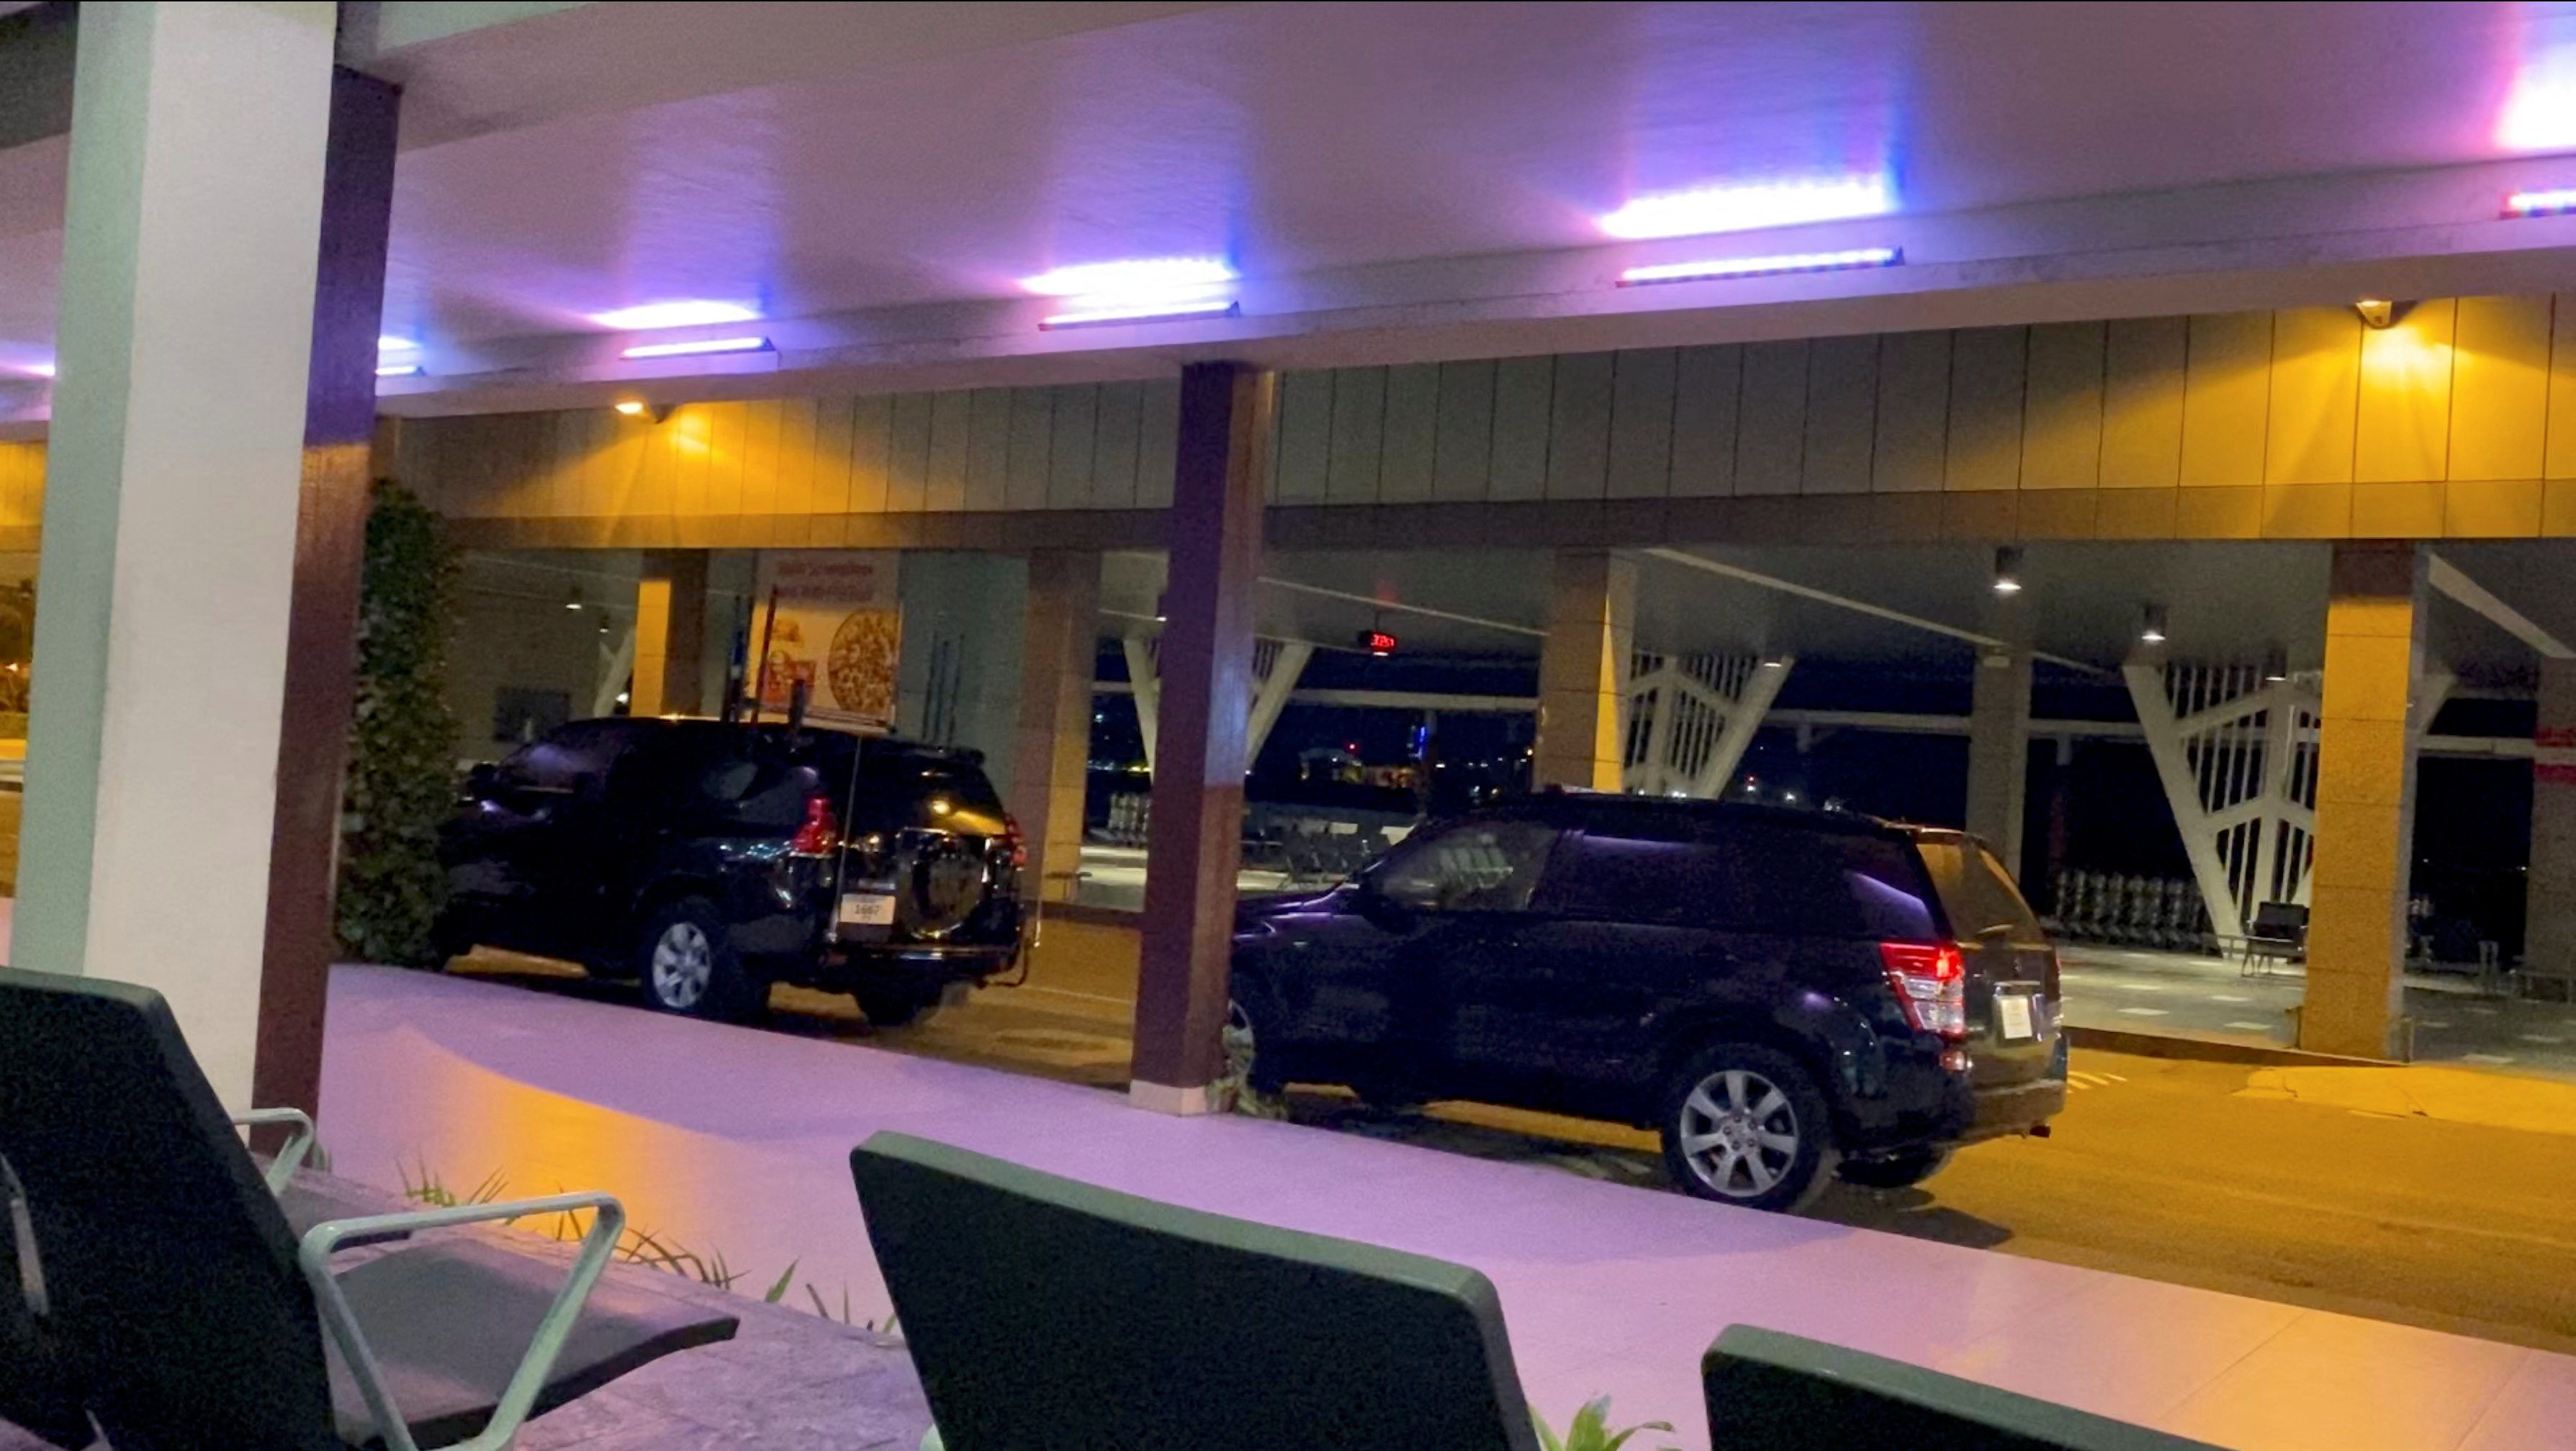 Vehicles parked in front of the VIP terminal of the Maldives airport in Malé, Maldives, on July 13, 2022 in this screenshot obtained from a video from social networks.  (Hathaavees via REUTERS)